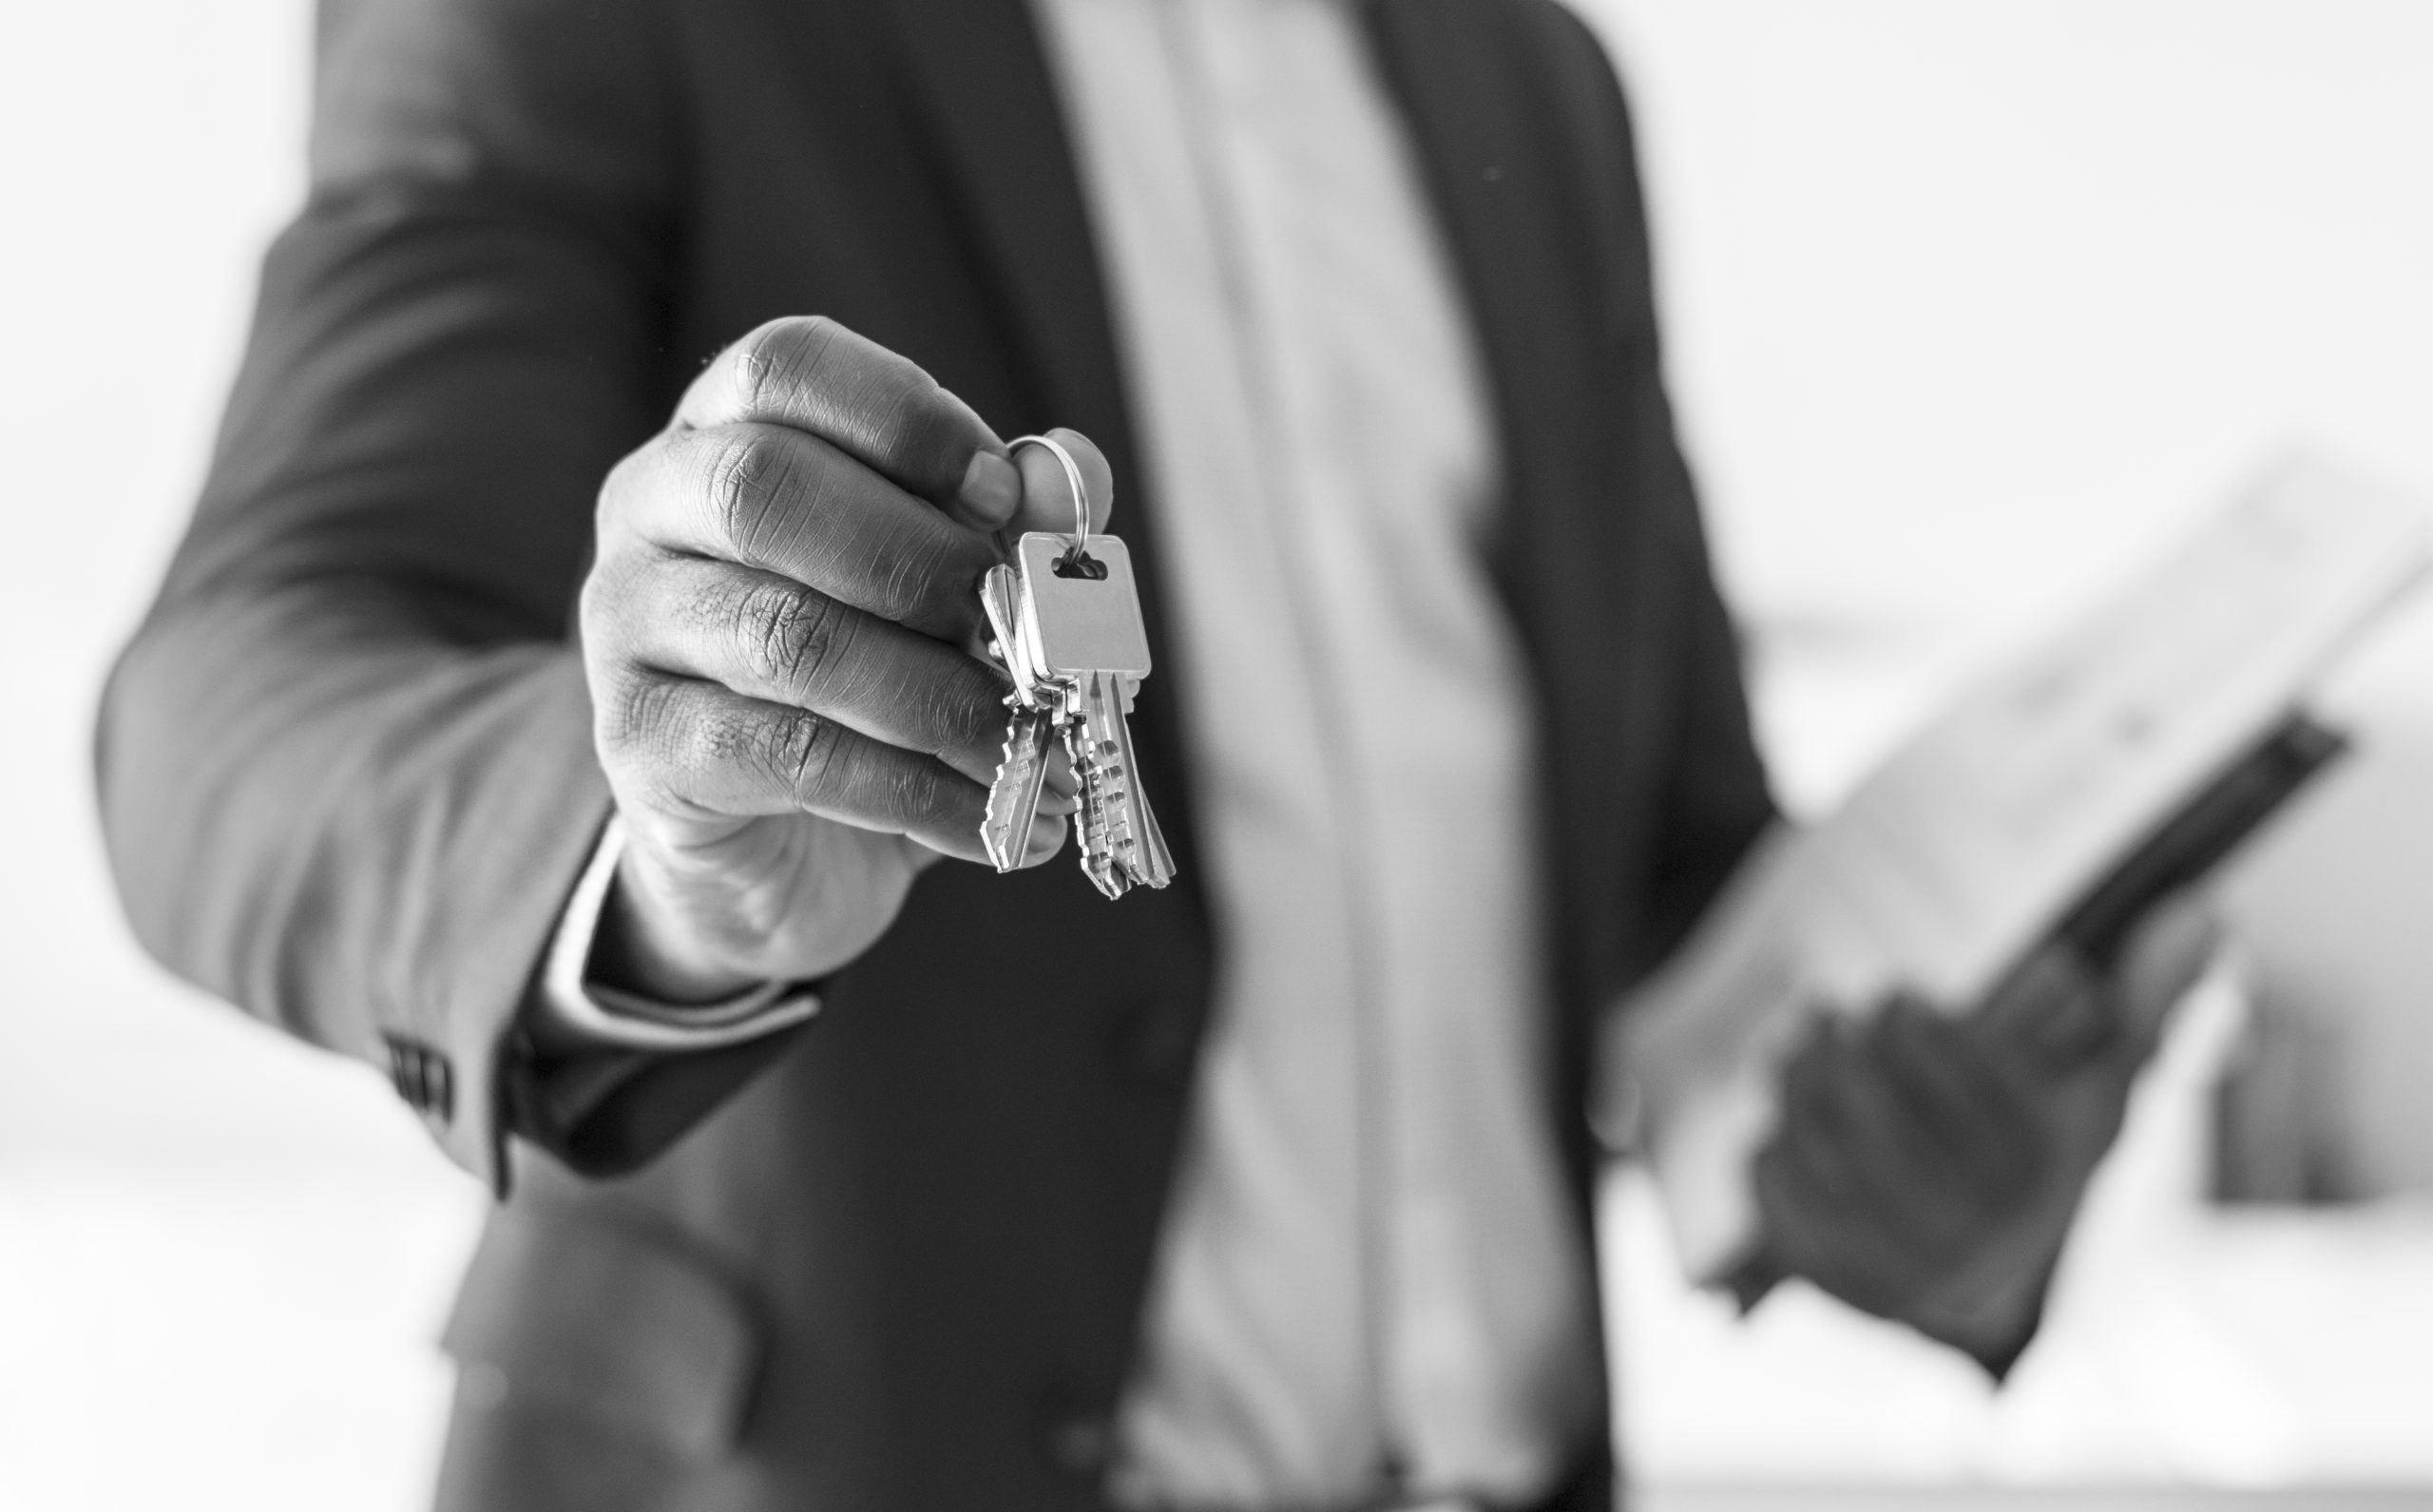 A Real Estate Agent Helps Take the Fear Out of the Market